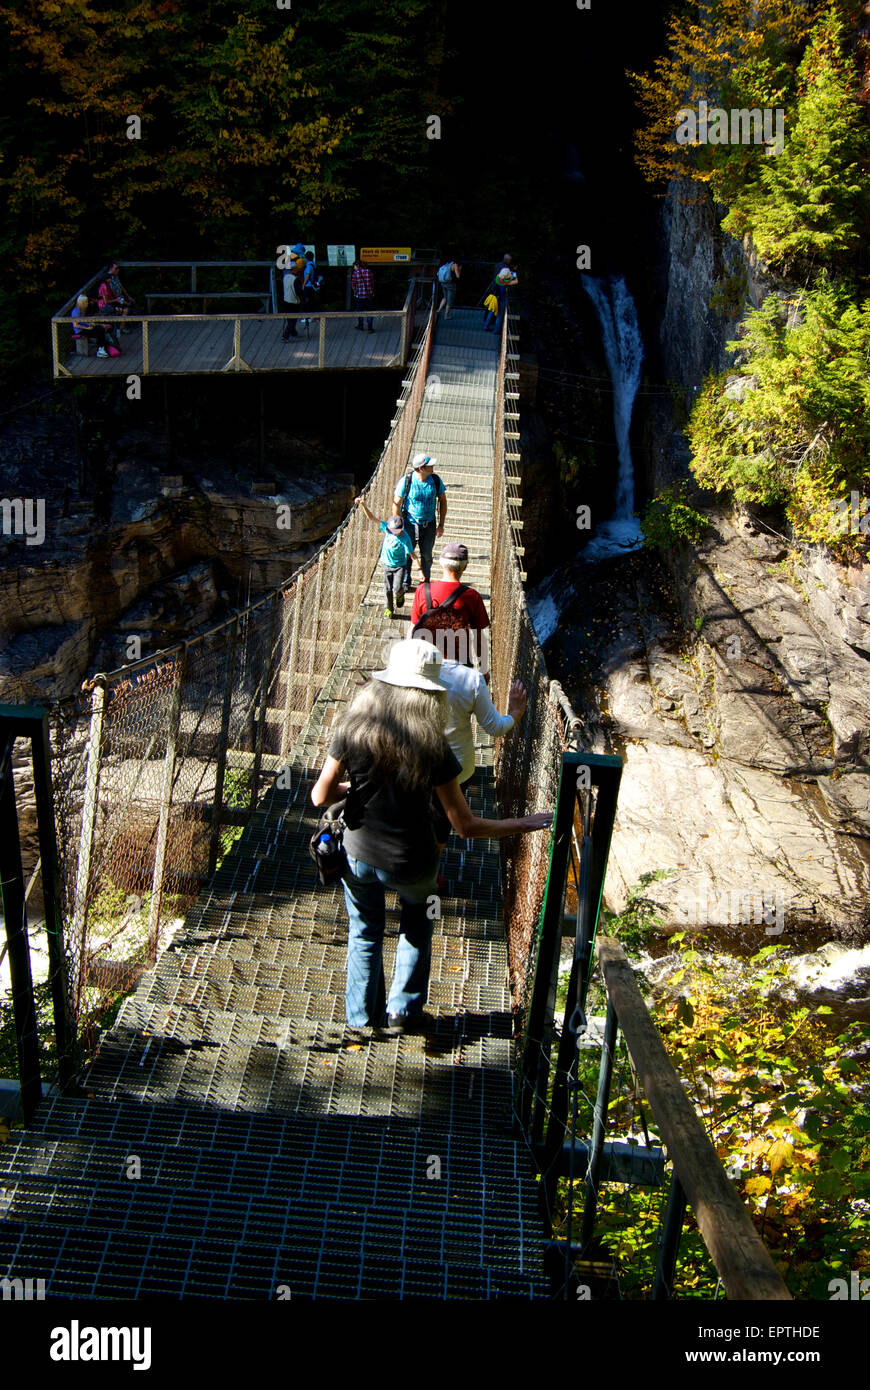 Pedestrians on suspension bridge over river gorge waterfall Canyon Ste Anne Park Stock Photo